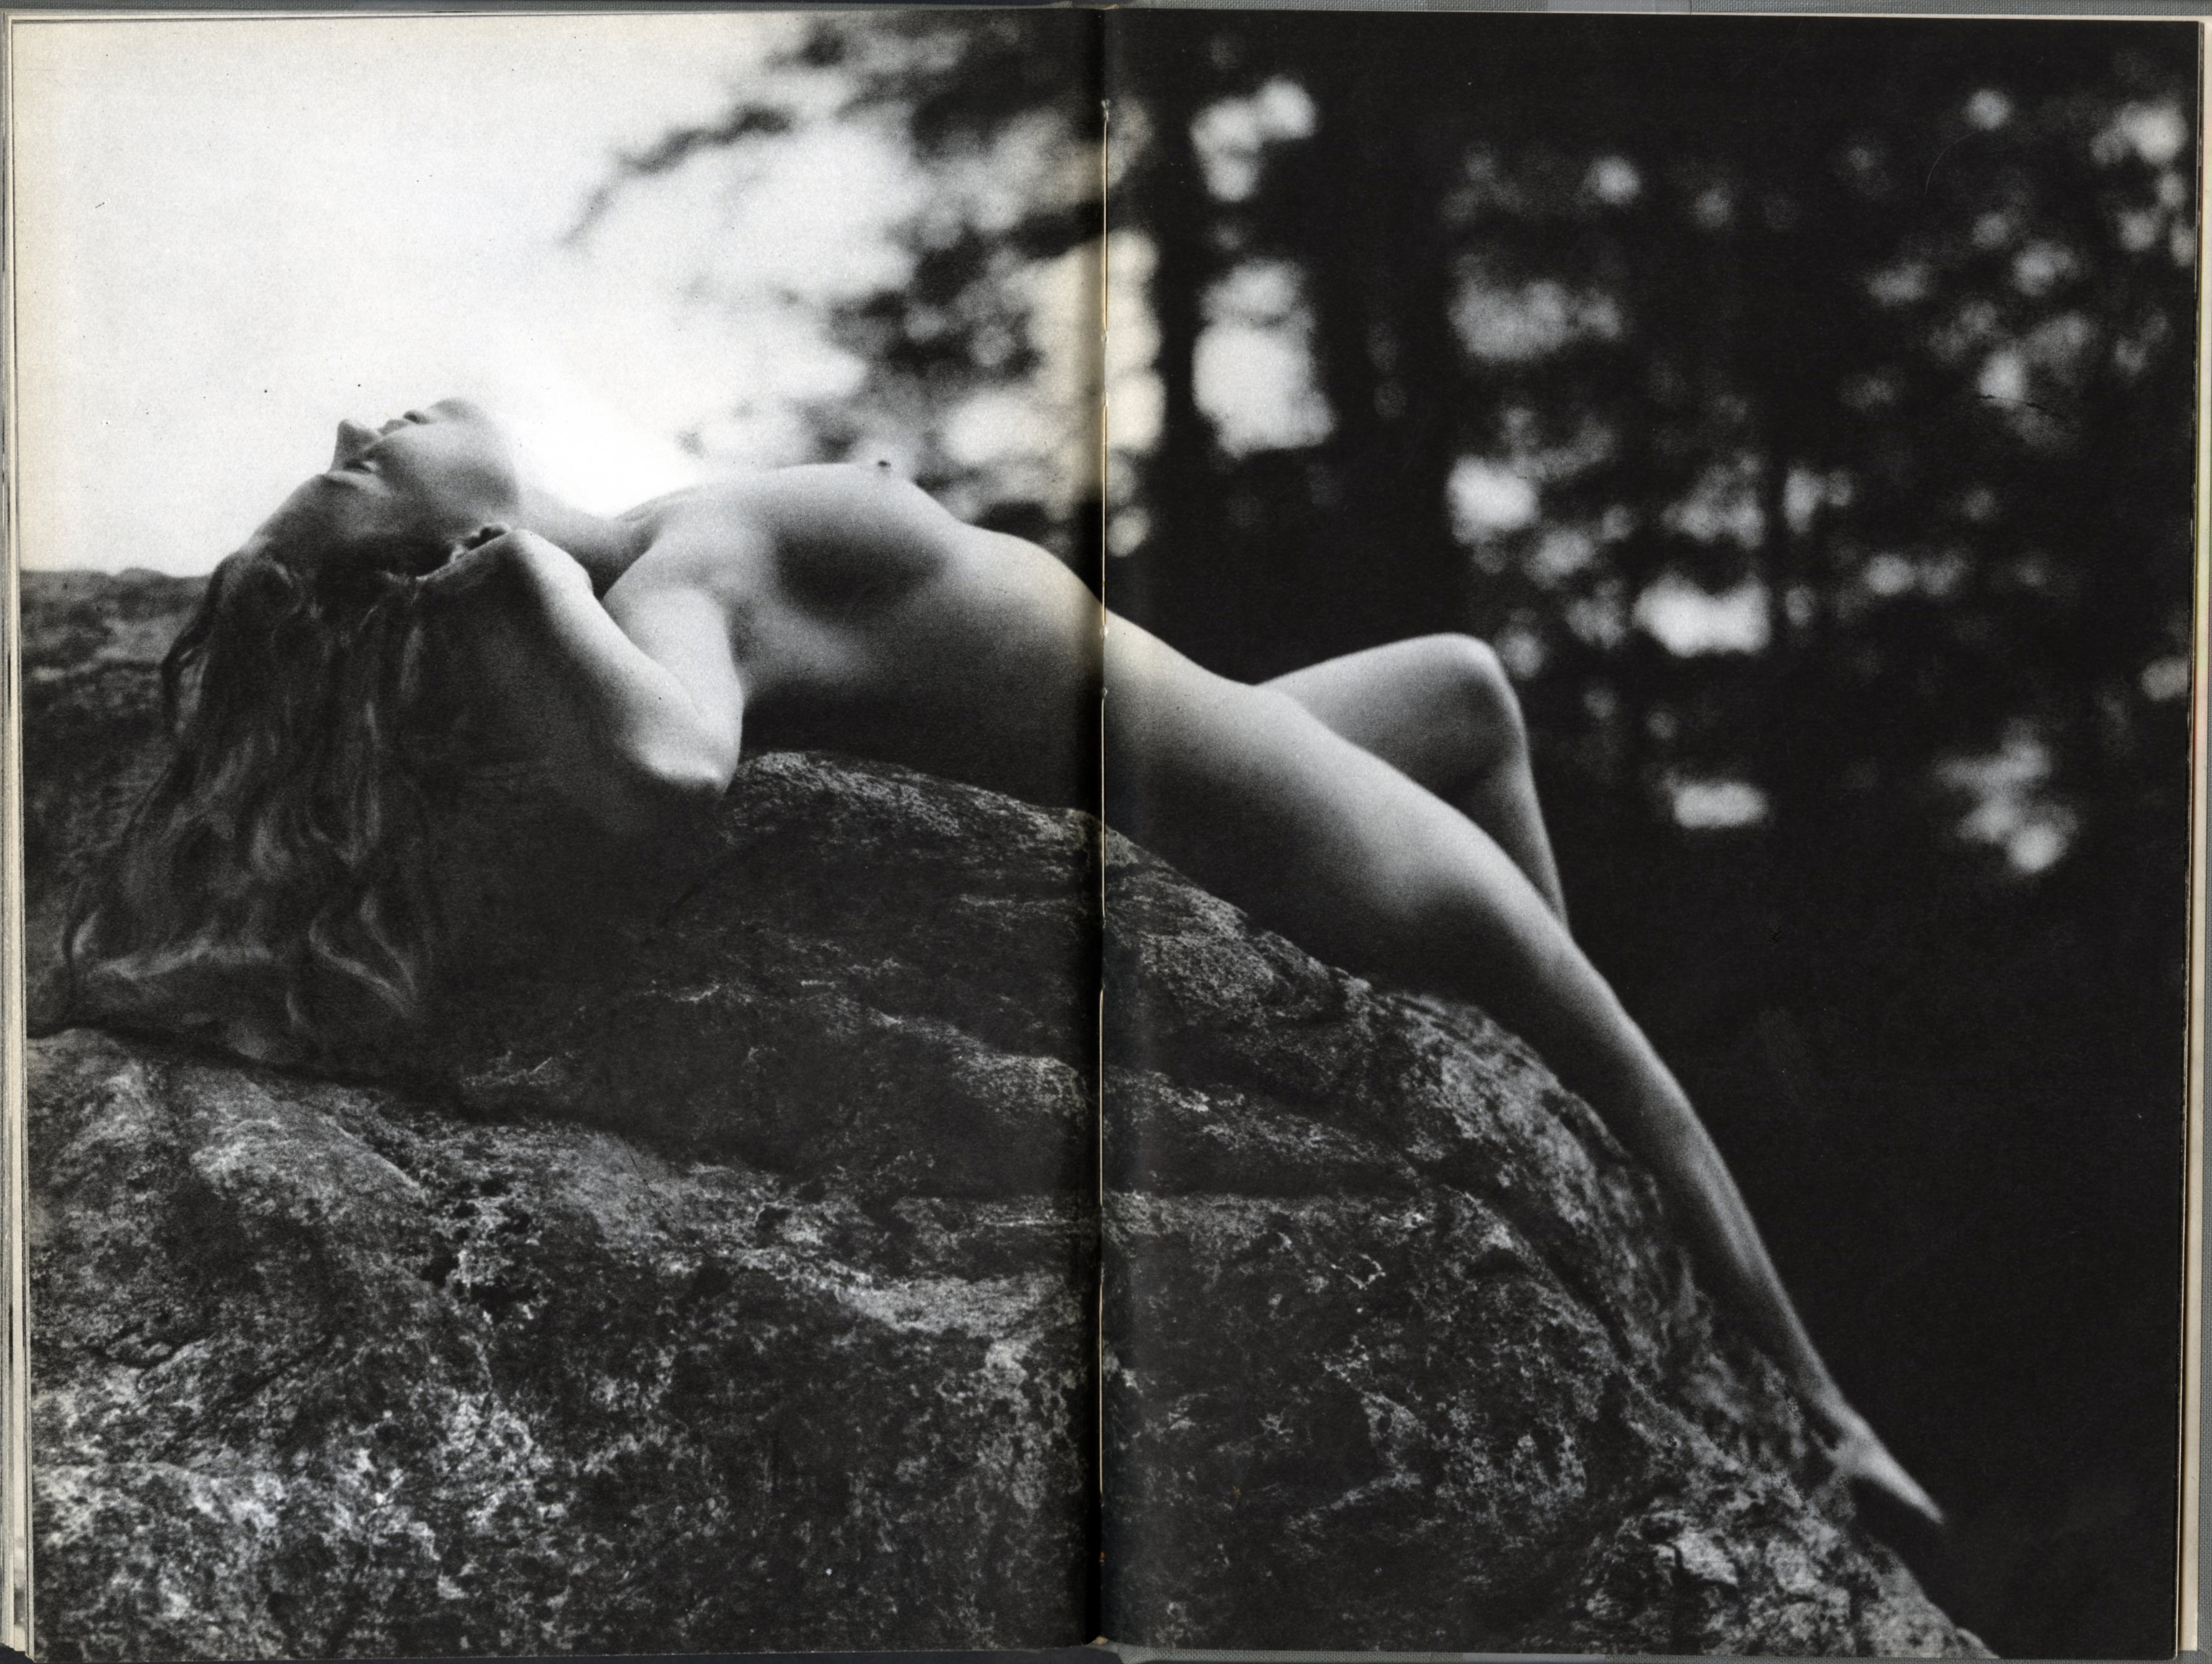 Nell Dorr - Nell Koons :: from "In a Blue Moon", published by G. P. Putnam’s Sons in 1939.